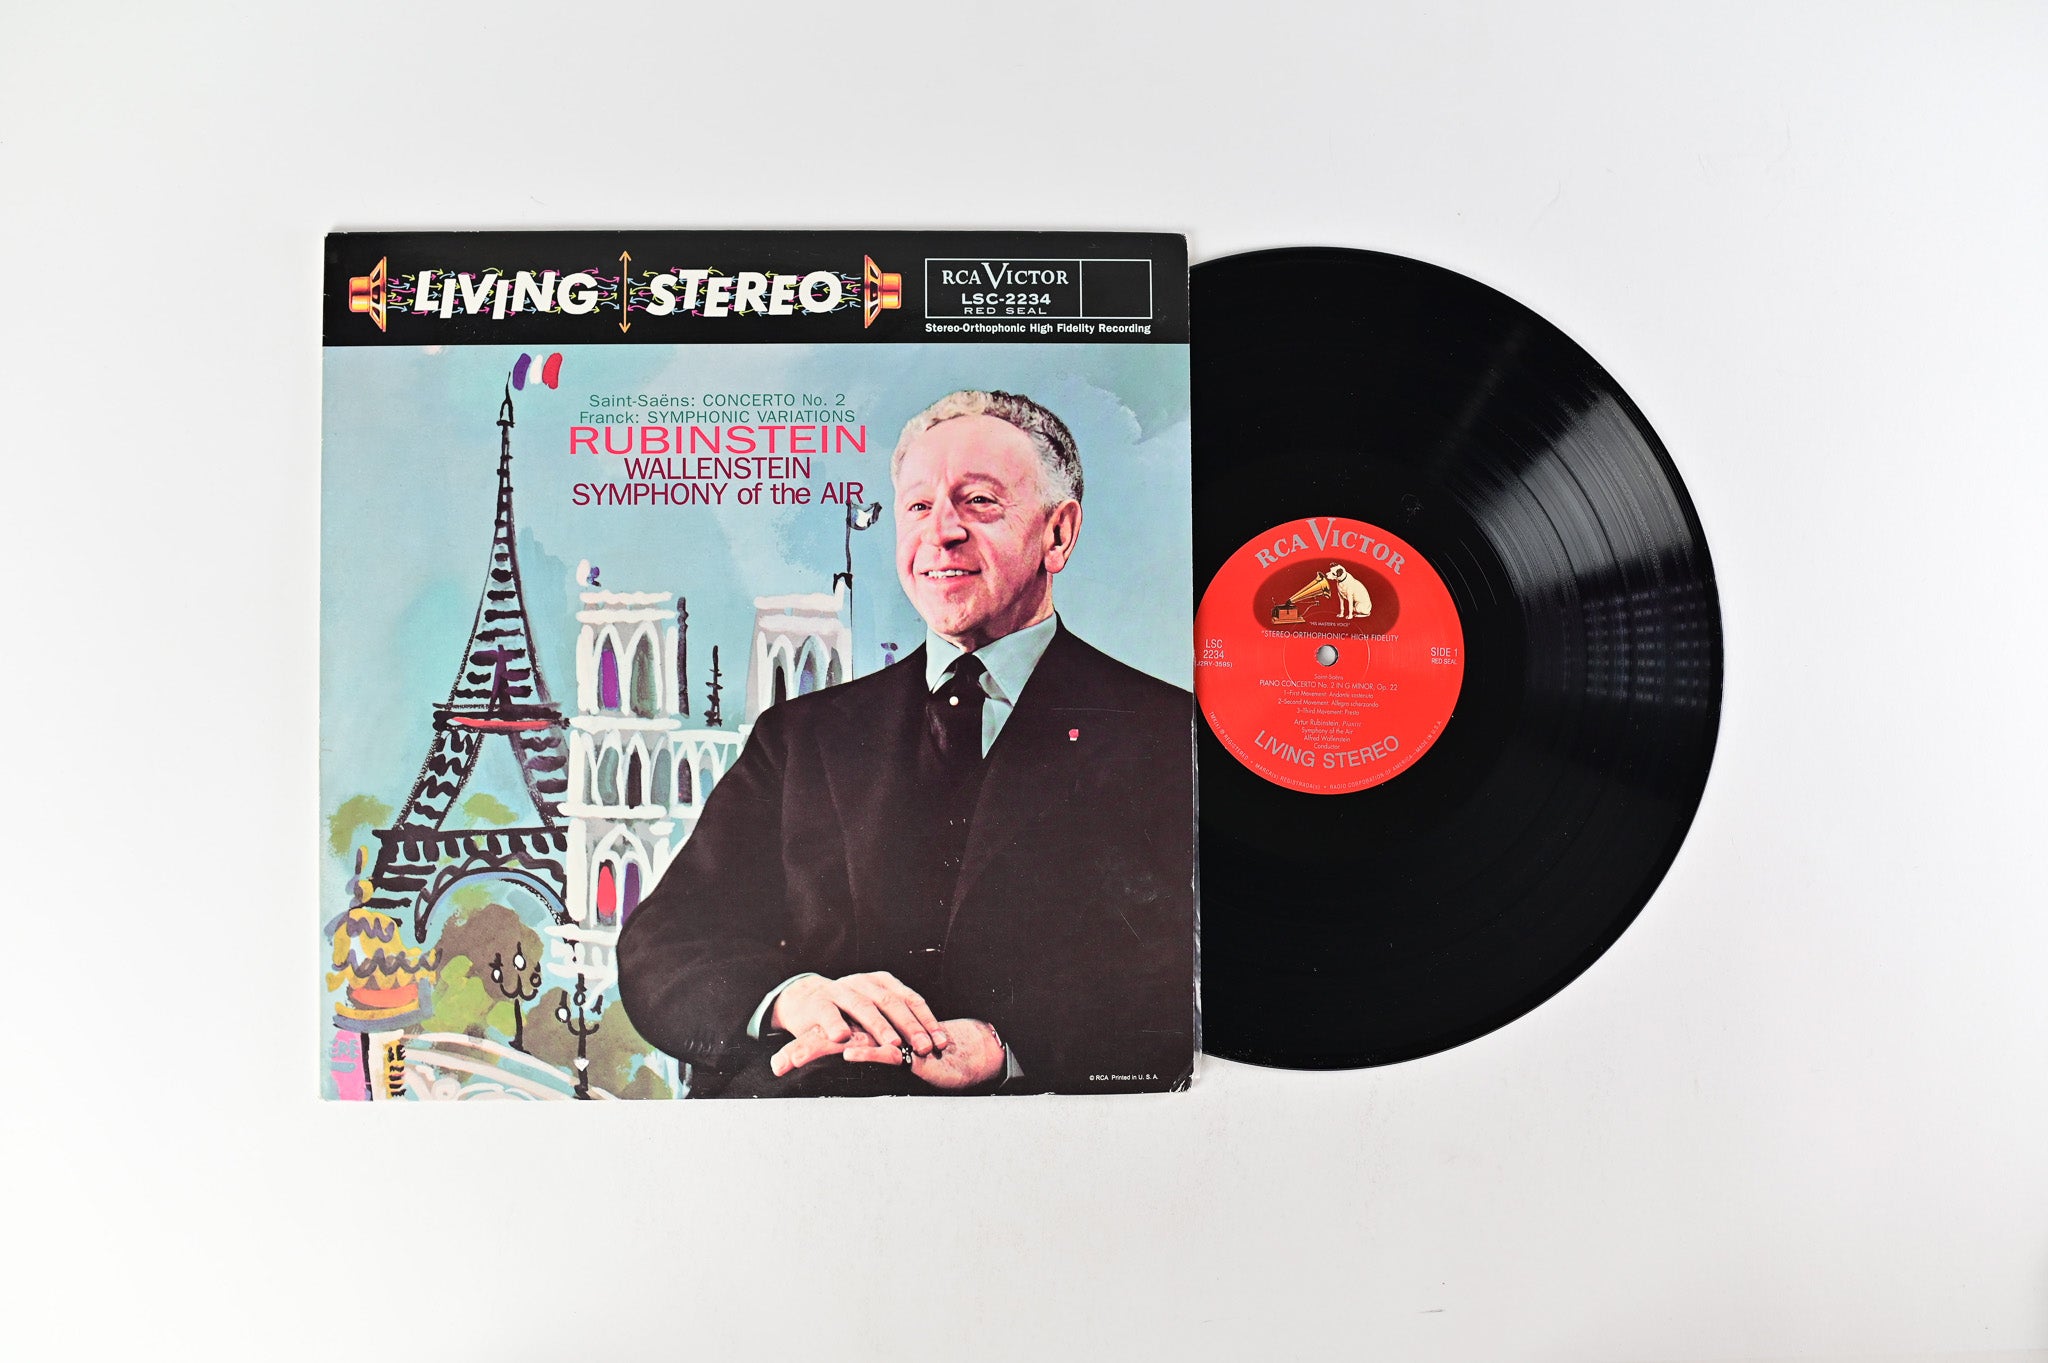 Arthur Rubinstein - Saint-Saëns: Concerto No.2 - Franck: Symphonic Variations Numbered Reissue on Classic Records